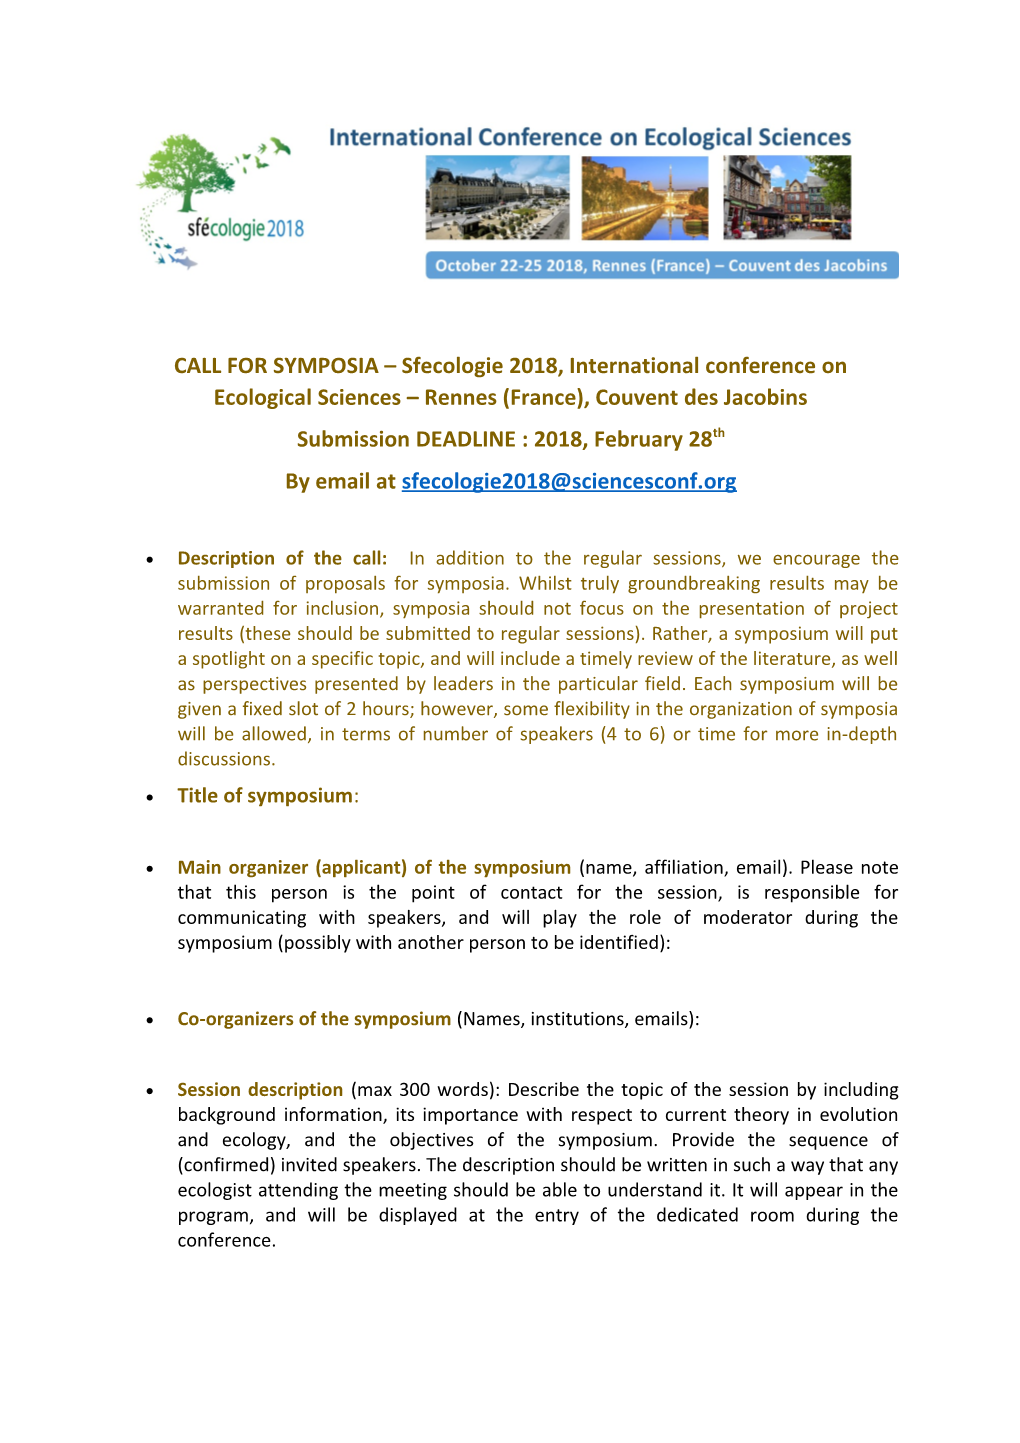 CALL for SYMPOSIA Sfecologie 2018, International Conference on Ecological Sciences Rennes